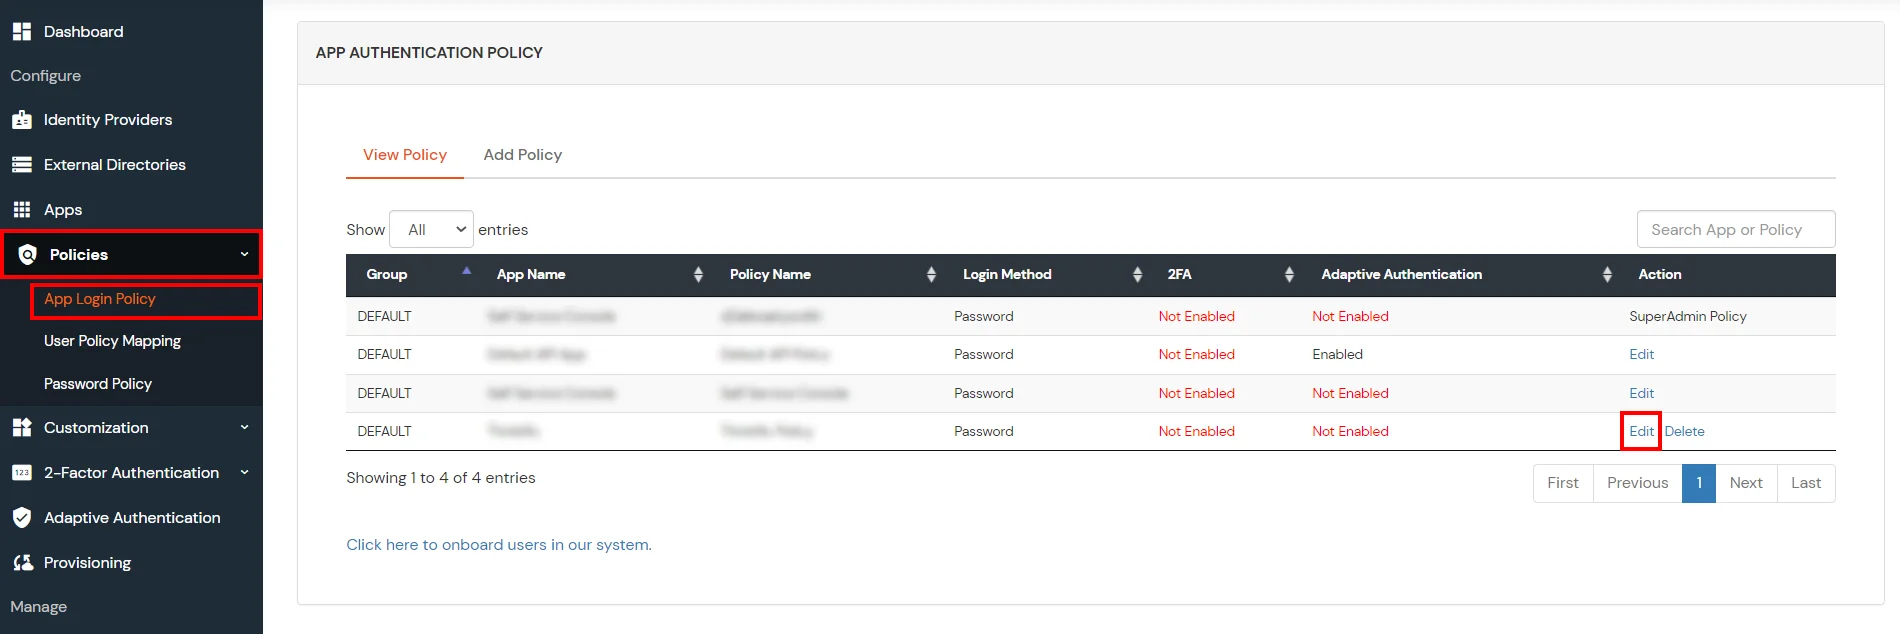 Servicenow Single Sign-On (sso) edit device restriction policy